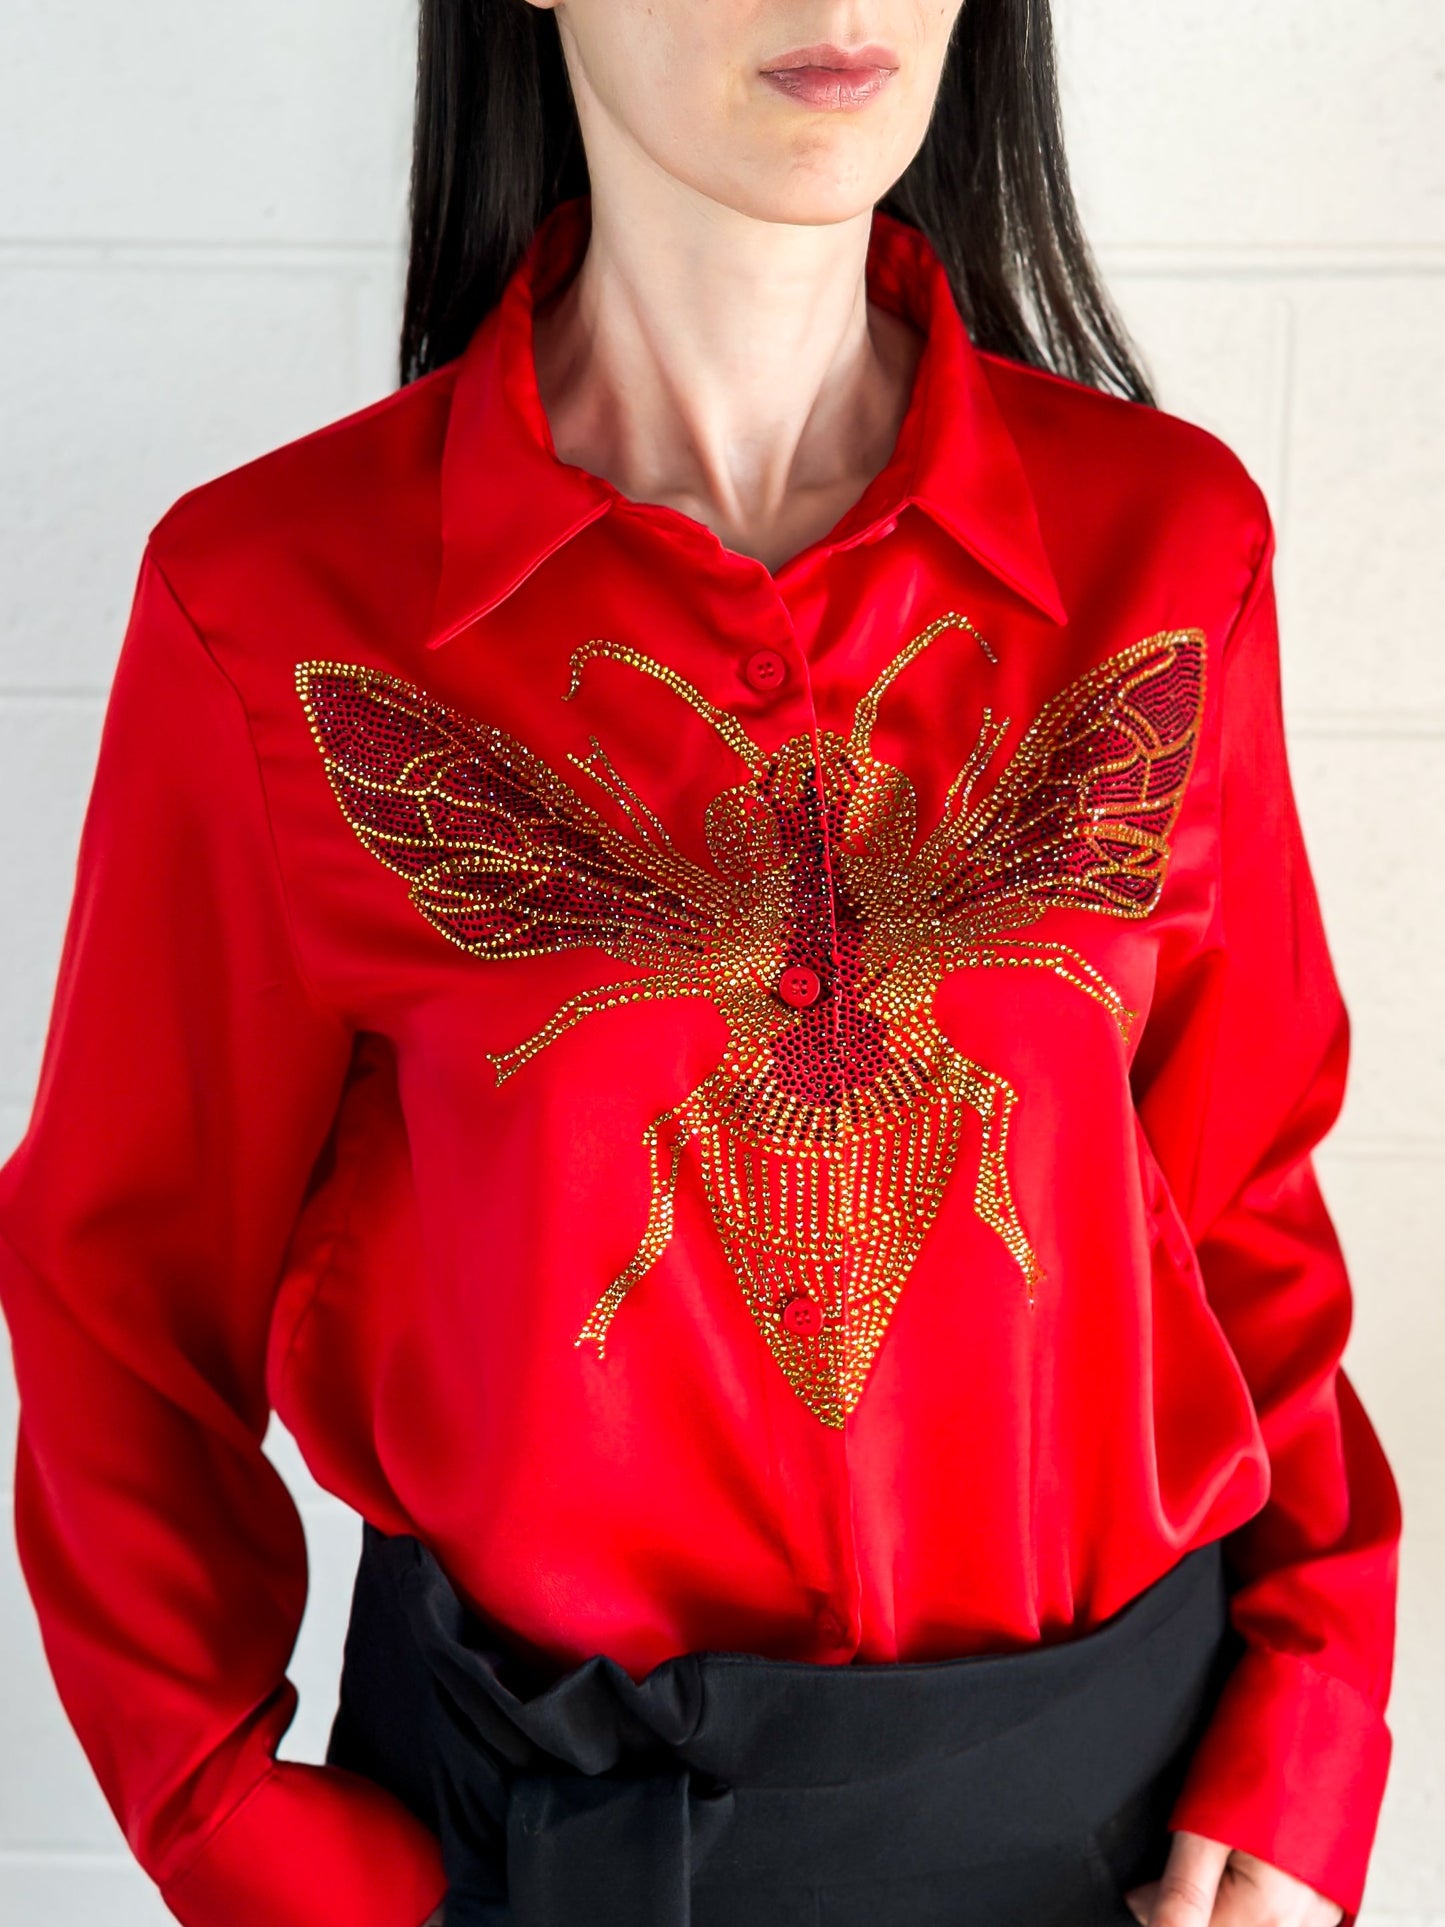 Shirt, Silky Red, Gold Queen Bee on Front